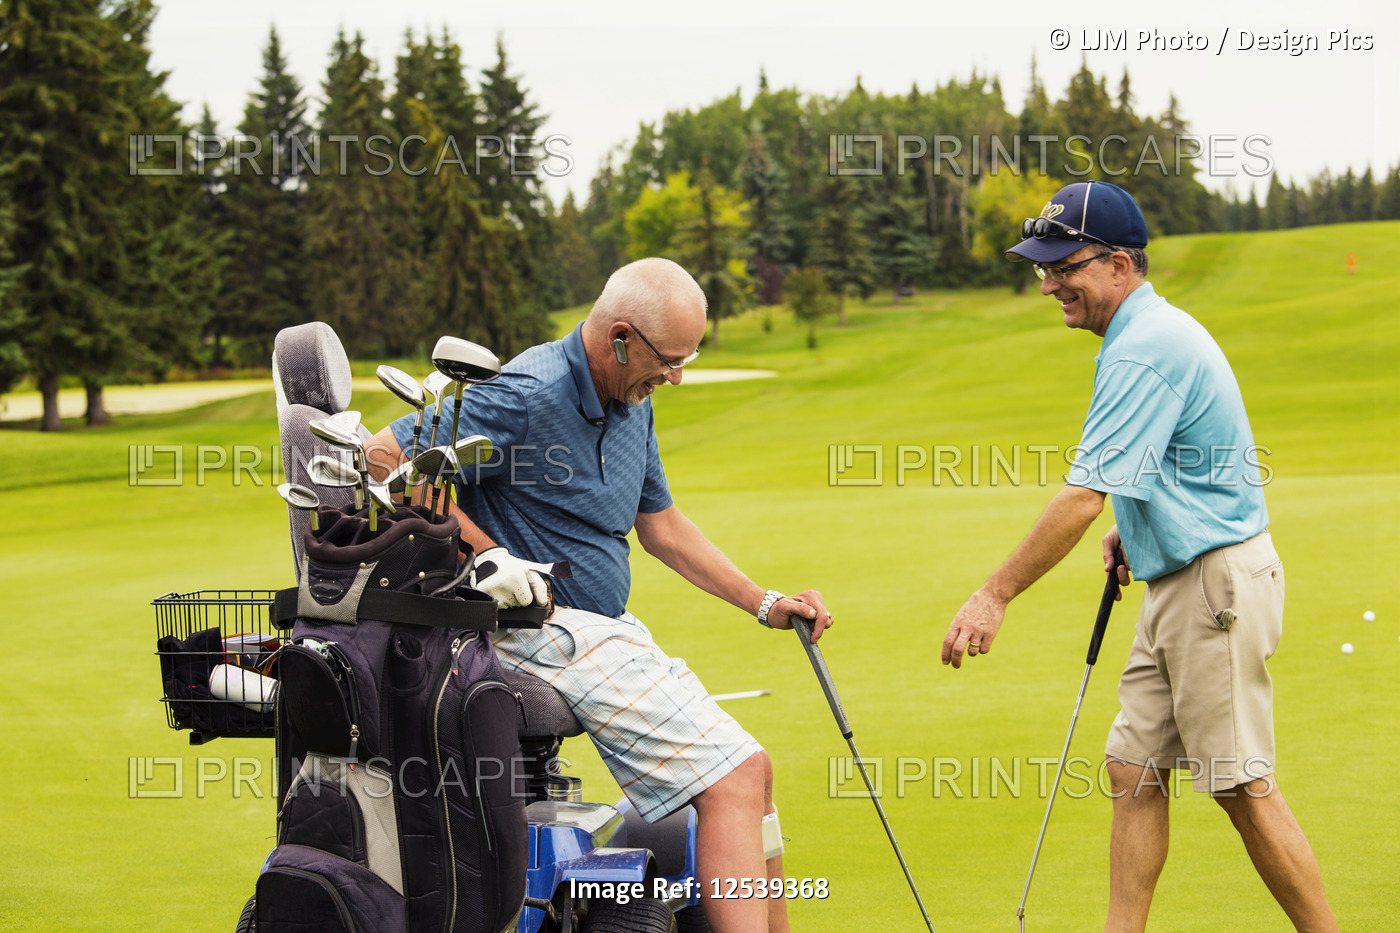 An able bodied golfer teams up with and assists a disabled golfer using a ...